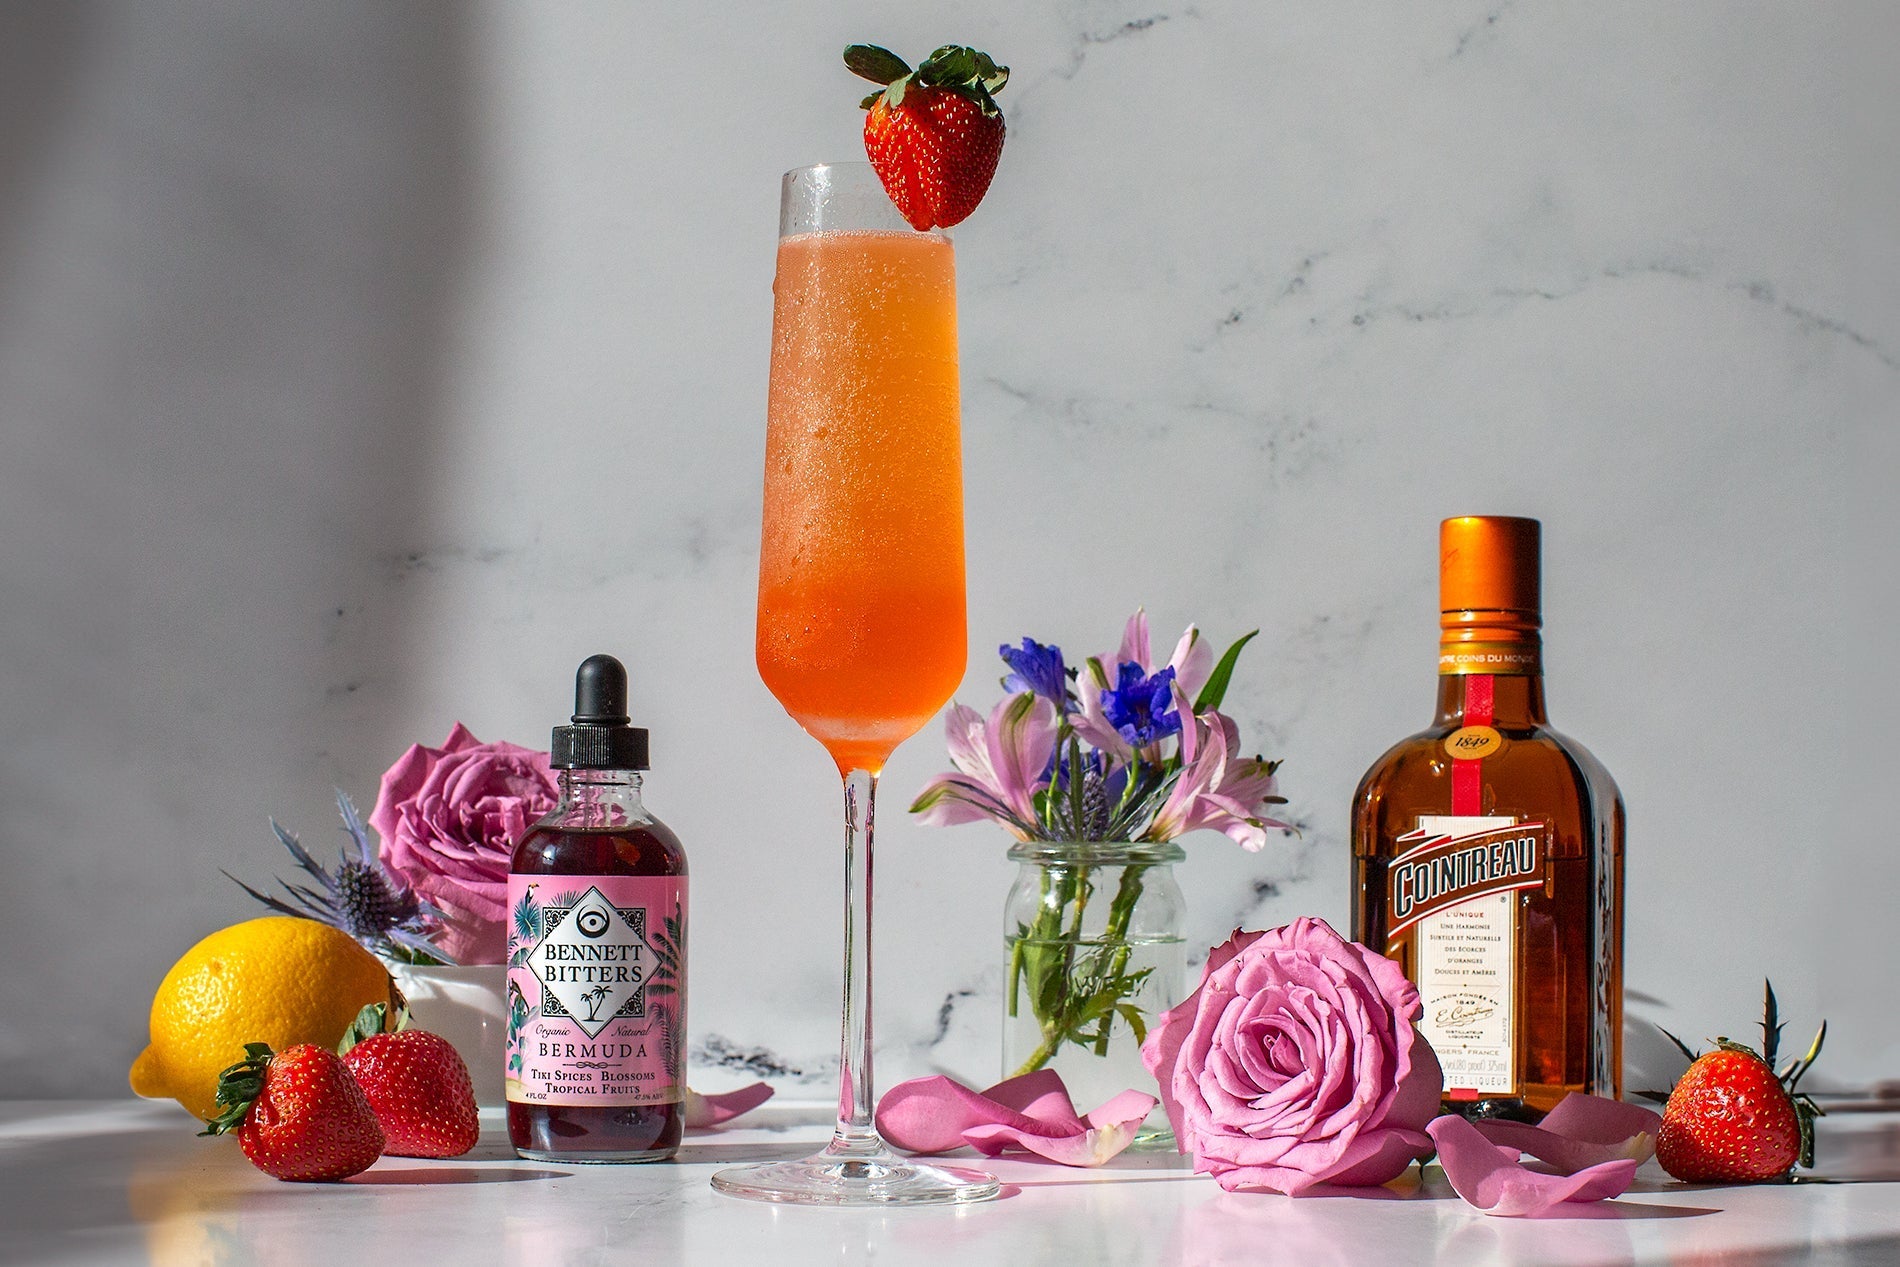 The Ideal Husband strawberry Champagne margarita in a white marble setting  with flowers, a bottle of Cointreau, a bottle of Bermuda Bitters, strawberries, and a lemon.